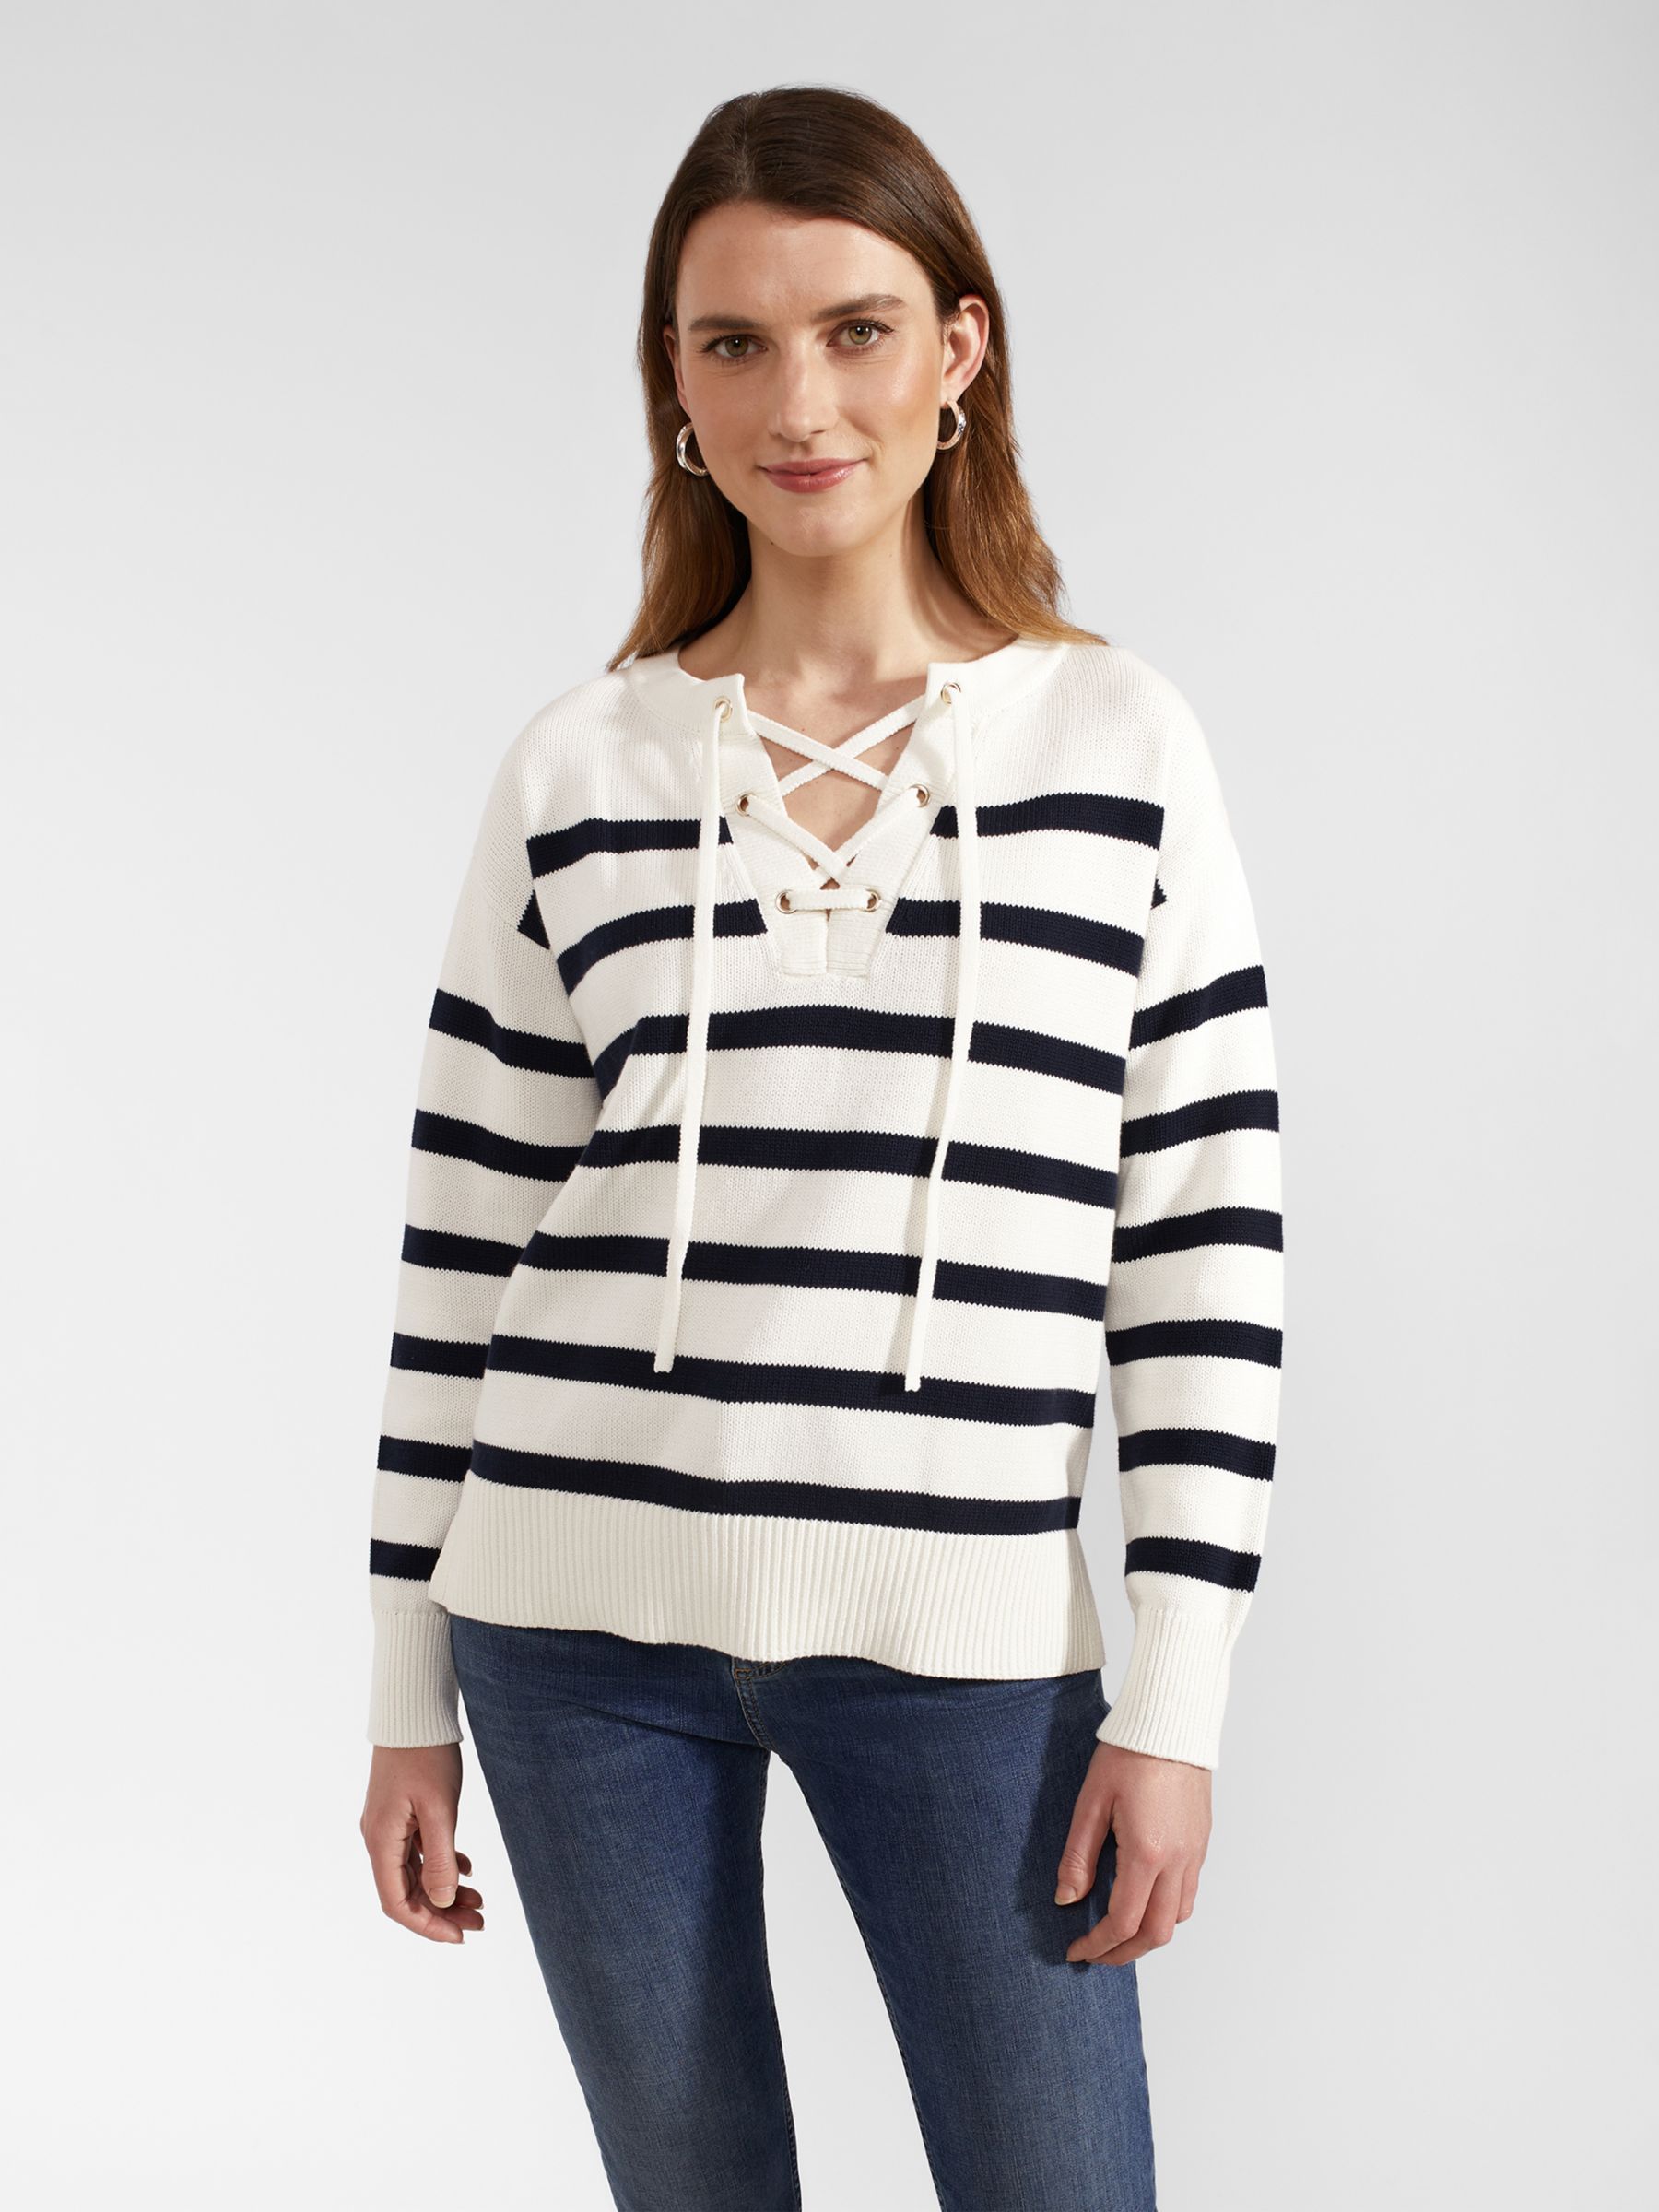 Hobbs Danica Striped Cotton Lace-Up Neck Jumper, Ivory/Navy, L